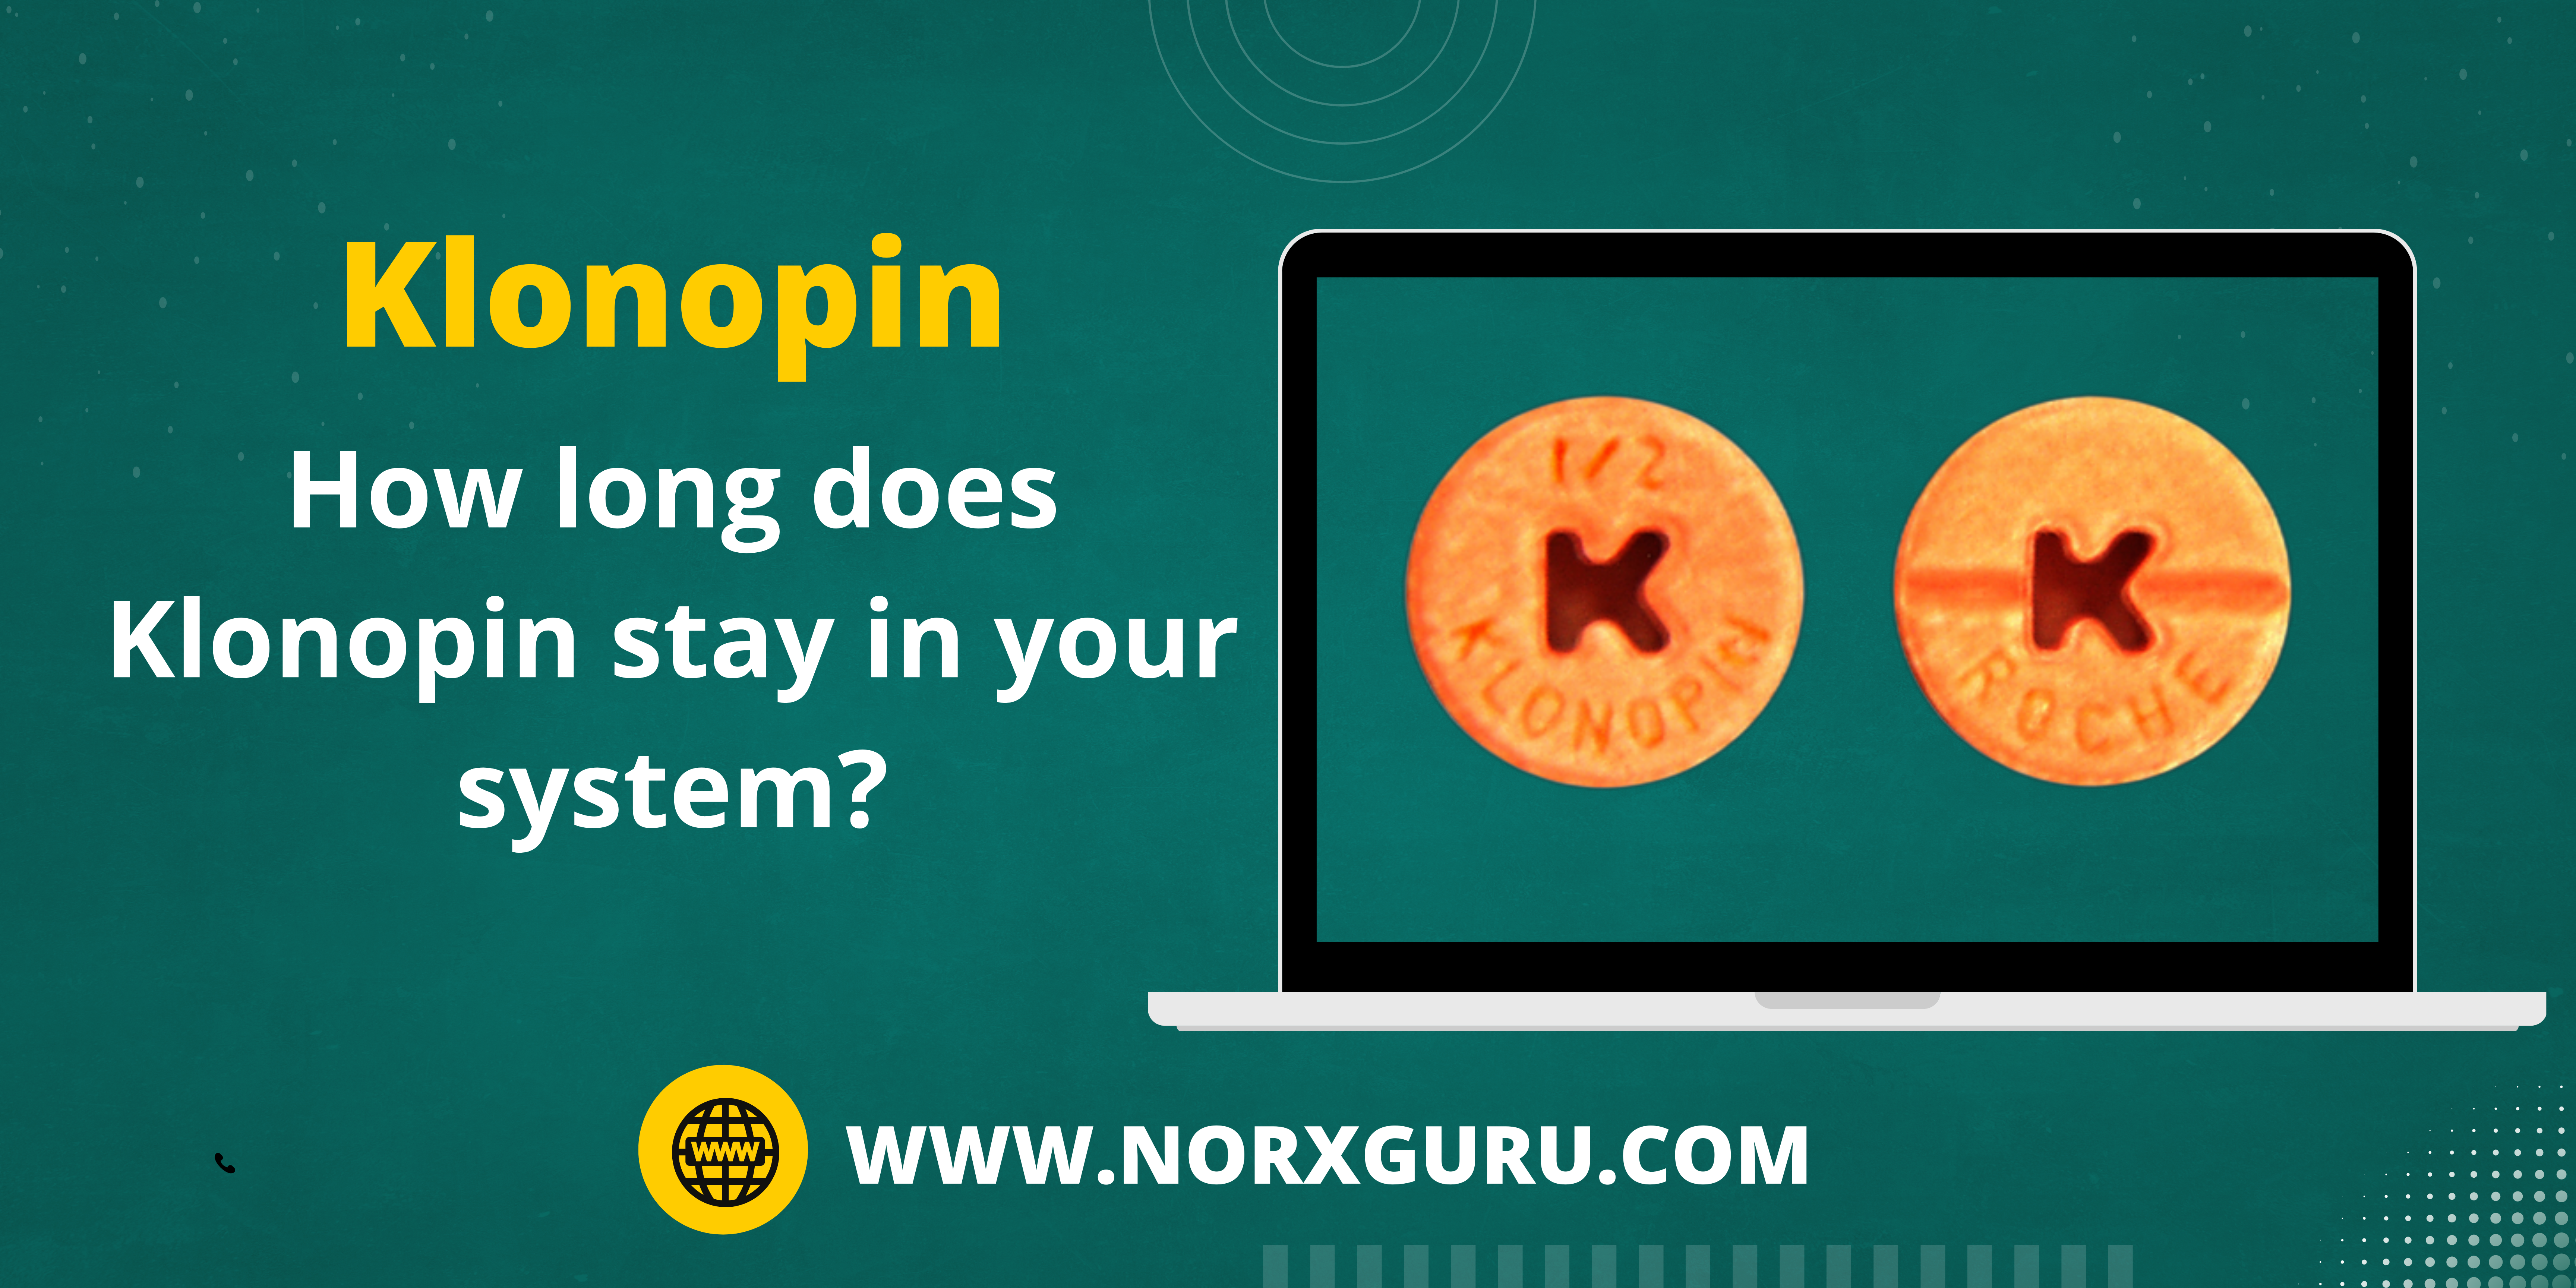 How long does Klonopin stay in your system?